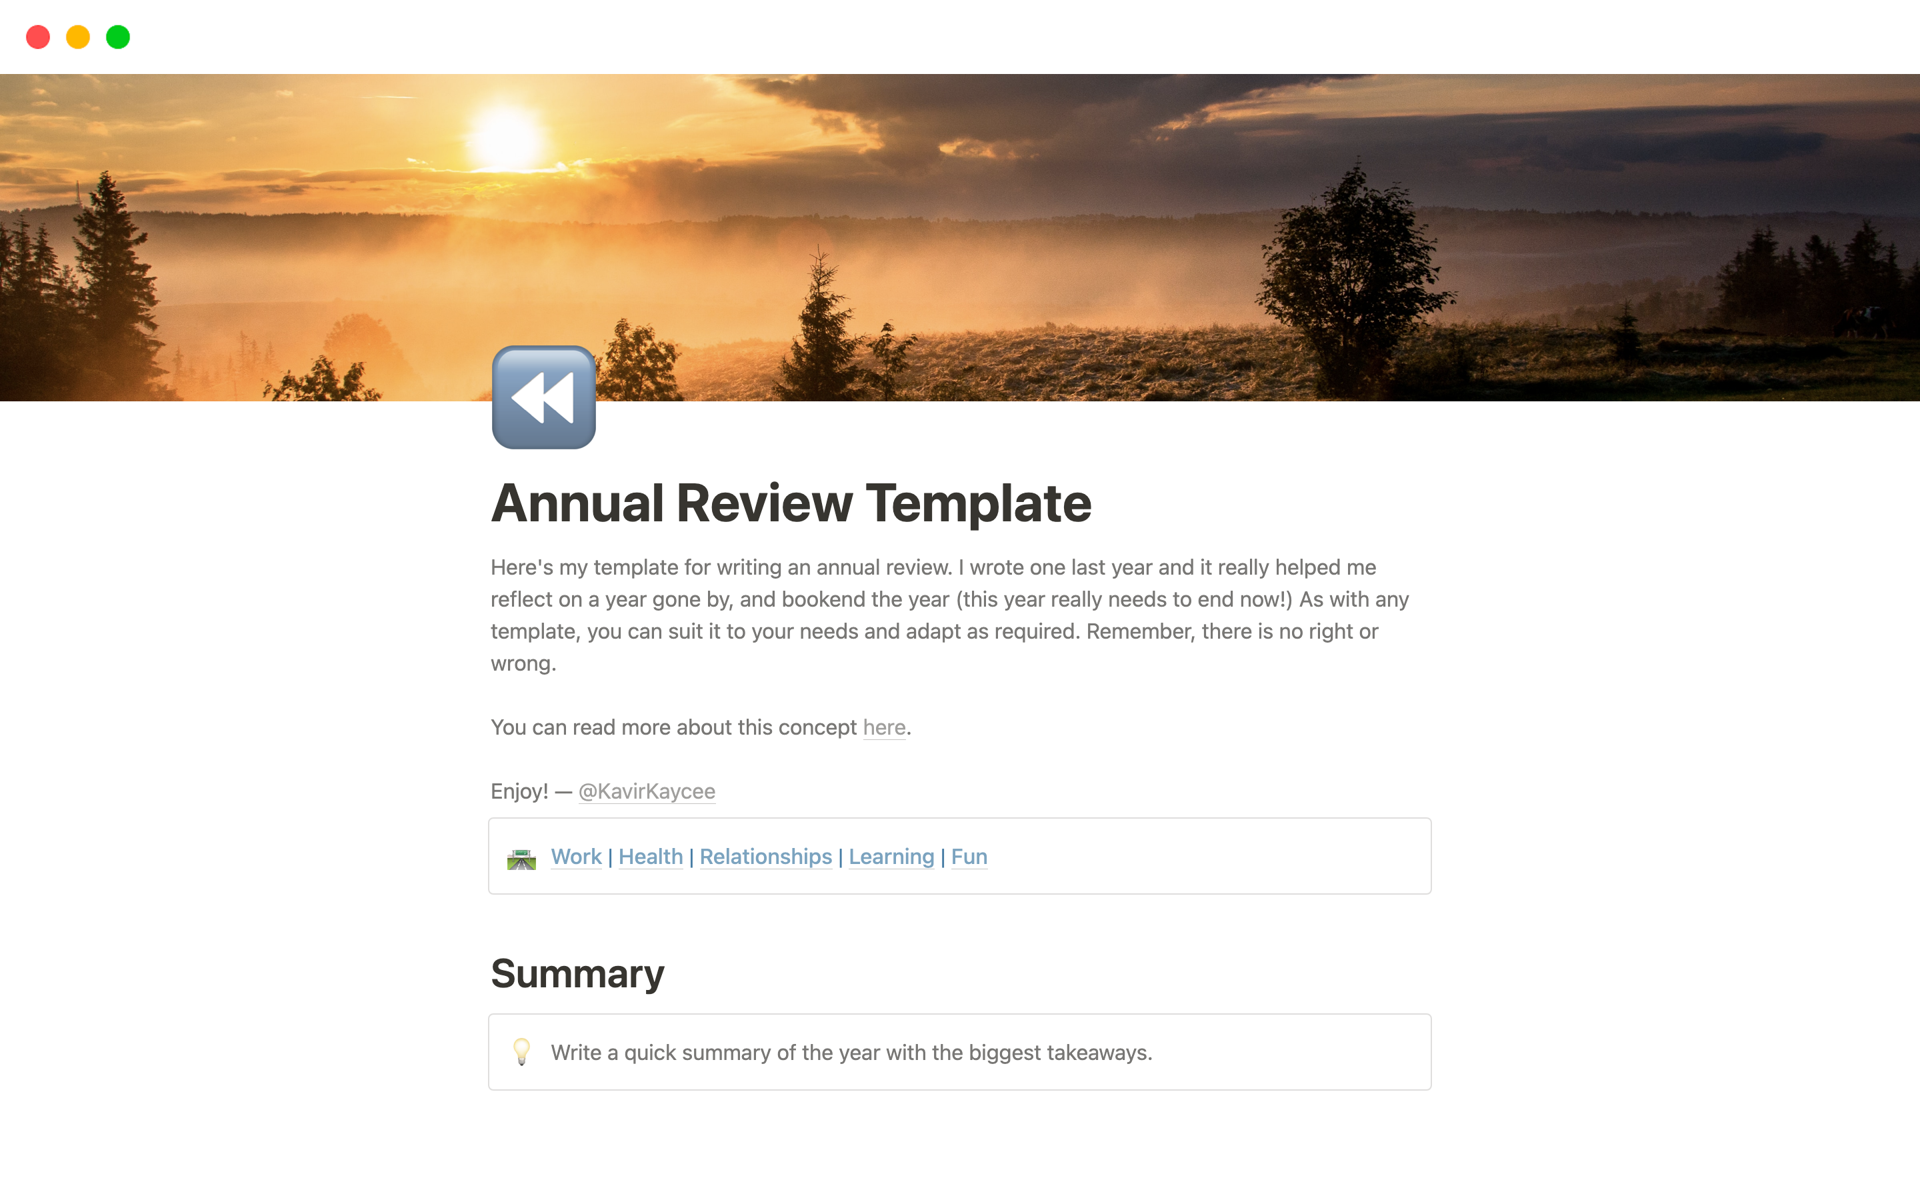 A template preview for Personal Annual Review